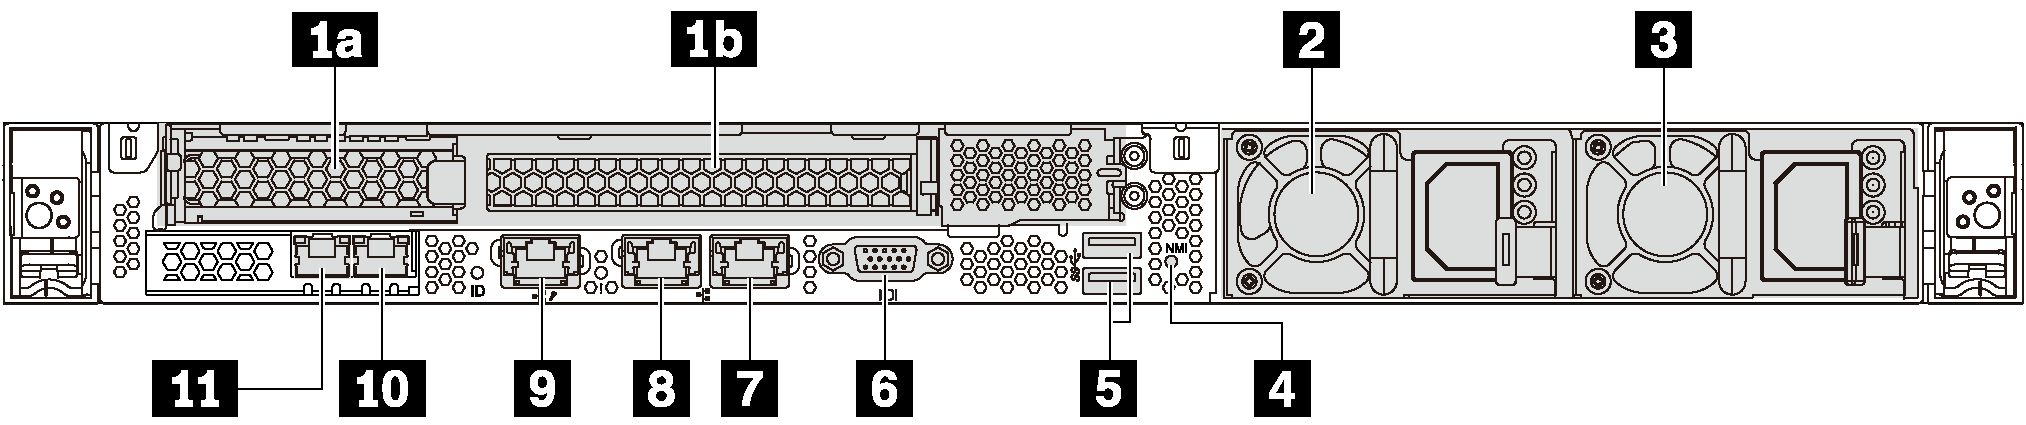 Graphic that depicts the rear view of the server. It includes callouts to identify each of the components.